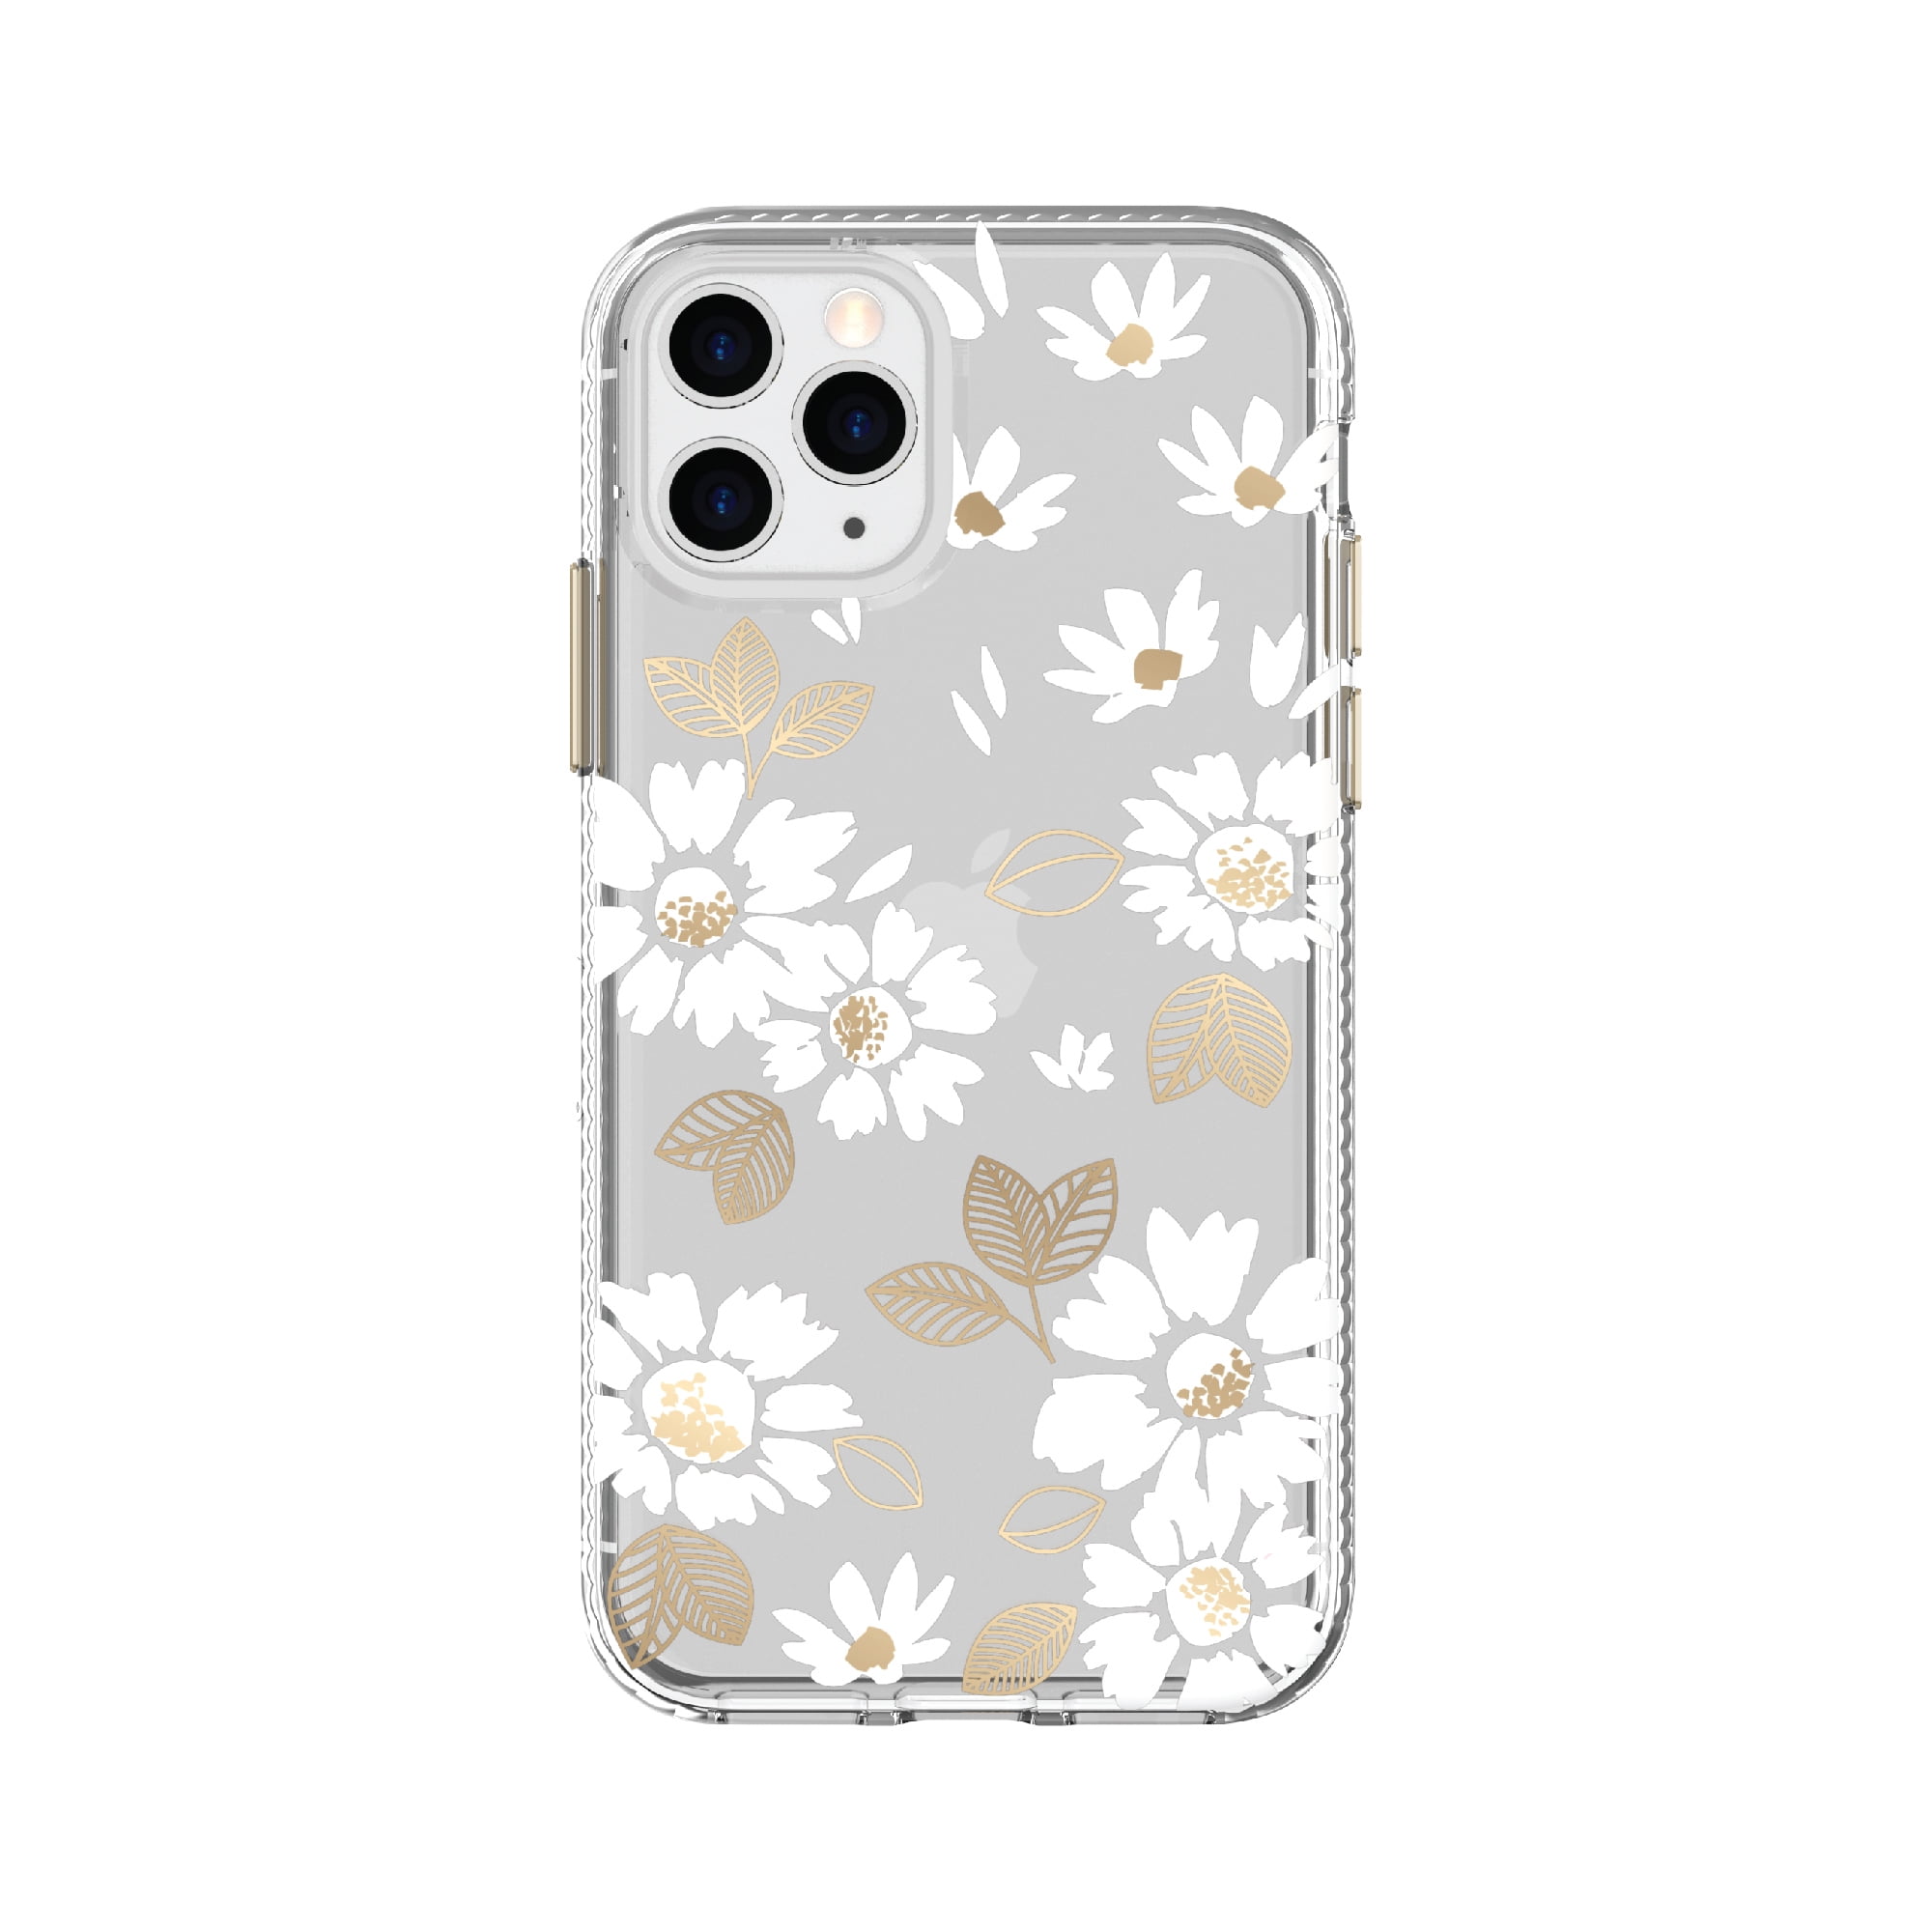 Beautiful Flowers Clear Handmade Design Clear Case For iphone 6 6s 7 8 Plus X Xr Xs Max 11 Pro Max Case Phone Cover